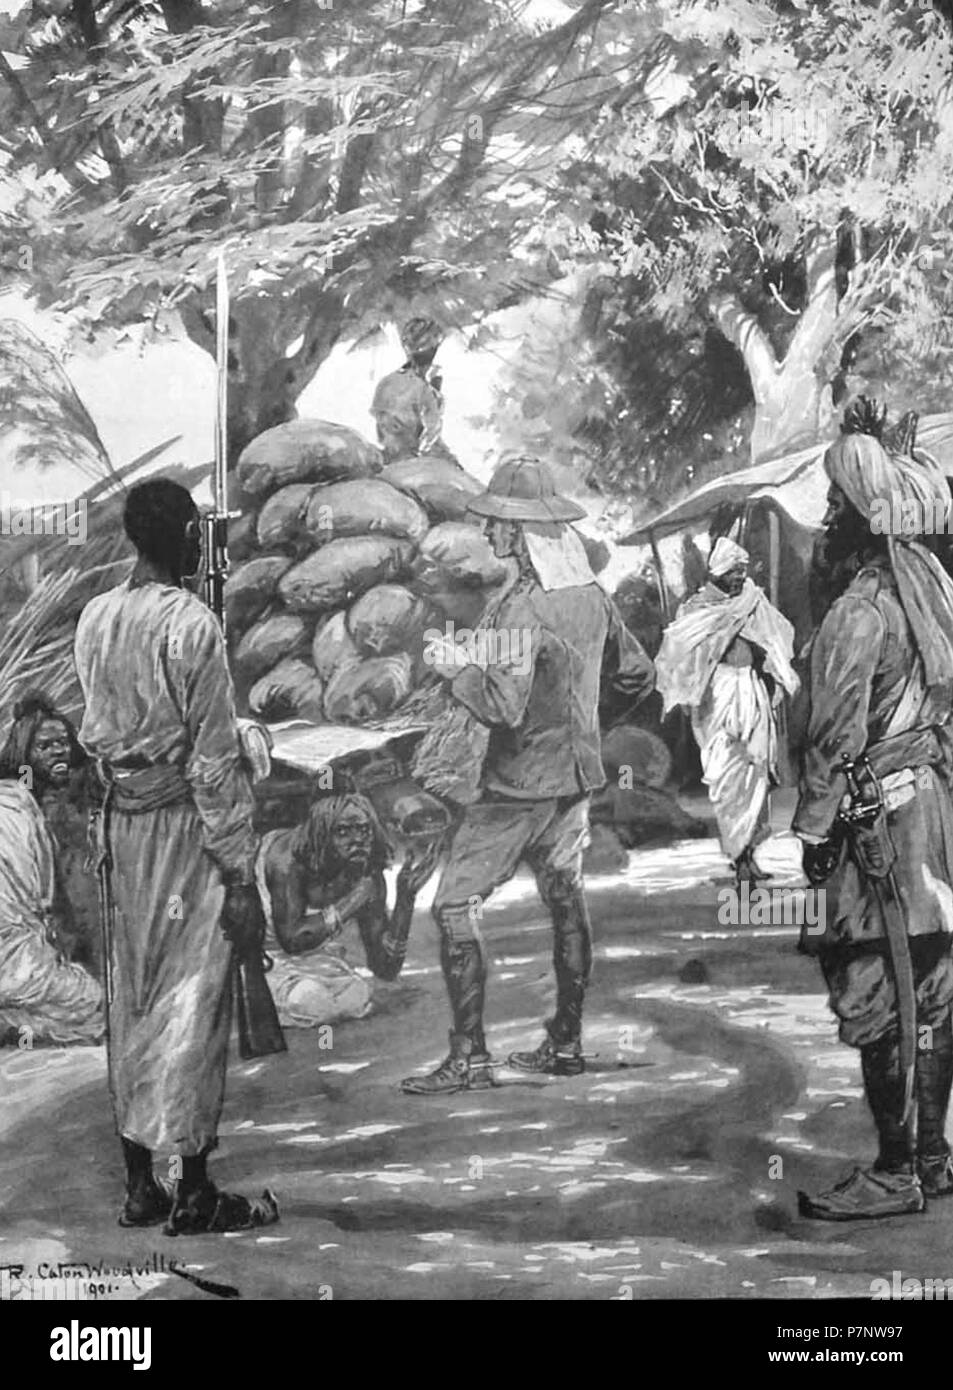 English: Illustration from 1901 titled The Defeat of the Mad Mullah in Somaliland showing a British officer casually interrogating prisoners at the base camp at Burao. Actually, the war against the Mad Mullah was just beginning. The illustration by well-known battle illustrator Richard Caton Woodville was published in the Illustrated London News in its 27 July 1901 issue. 1901 254 Mad Mullah War Caton Woodville illustration Stock Photo